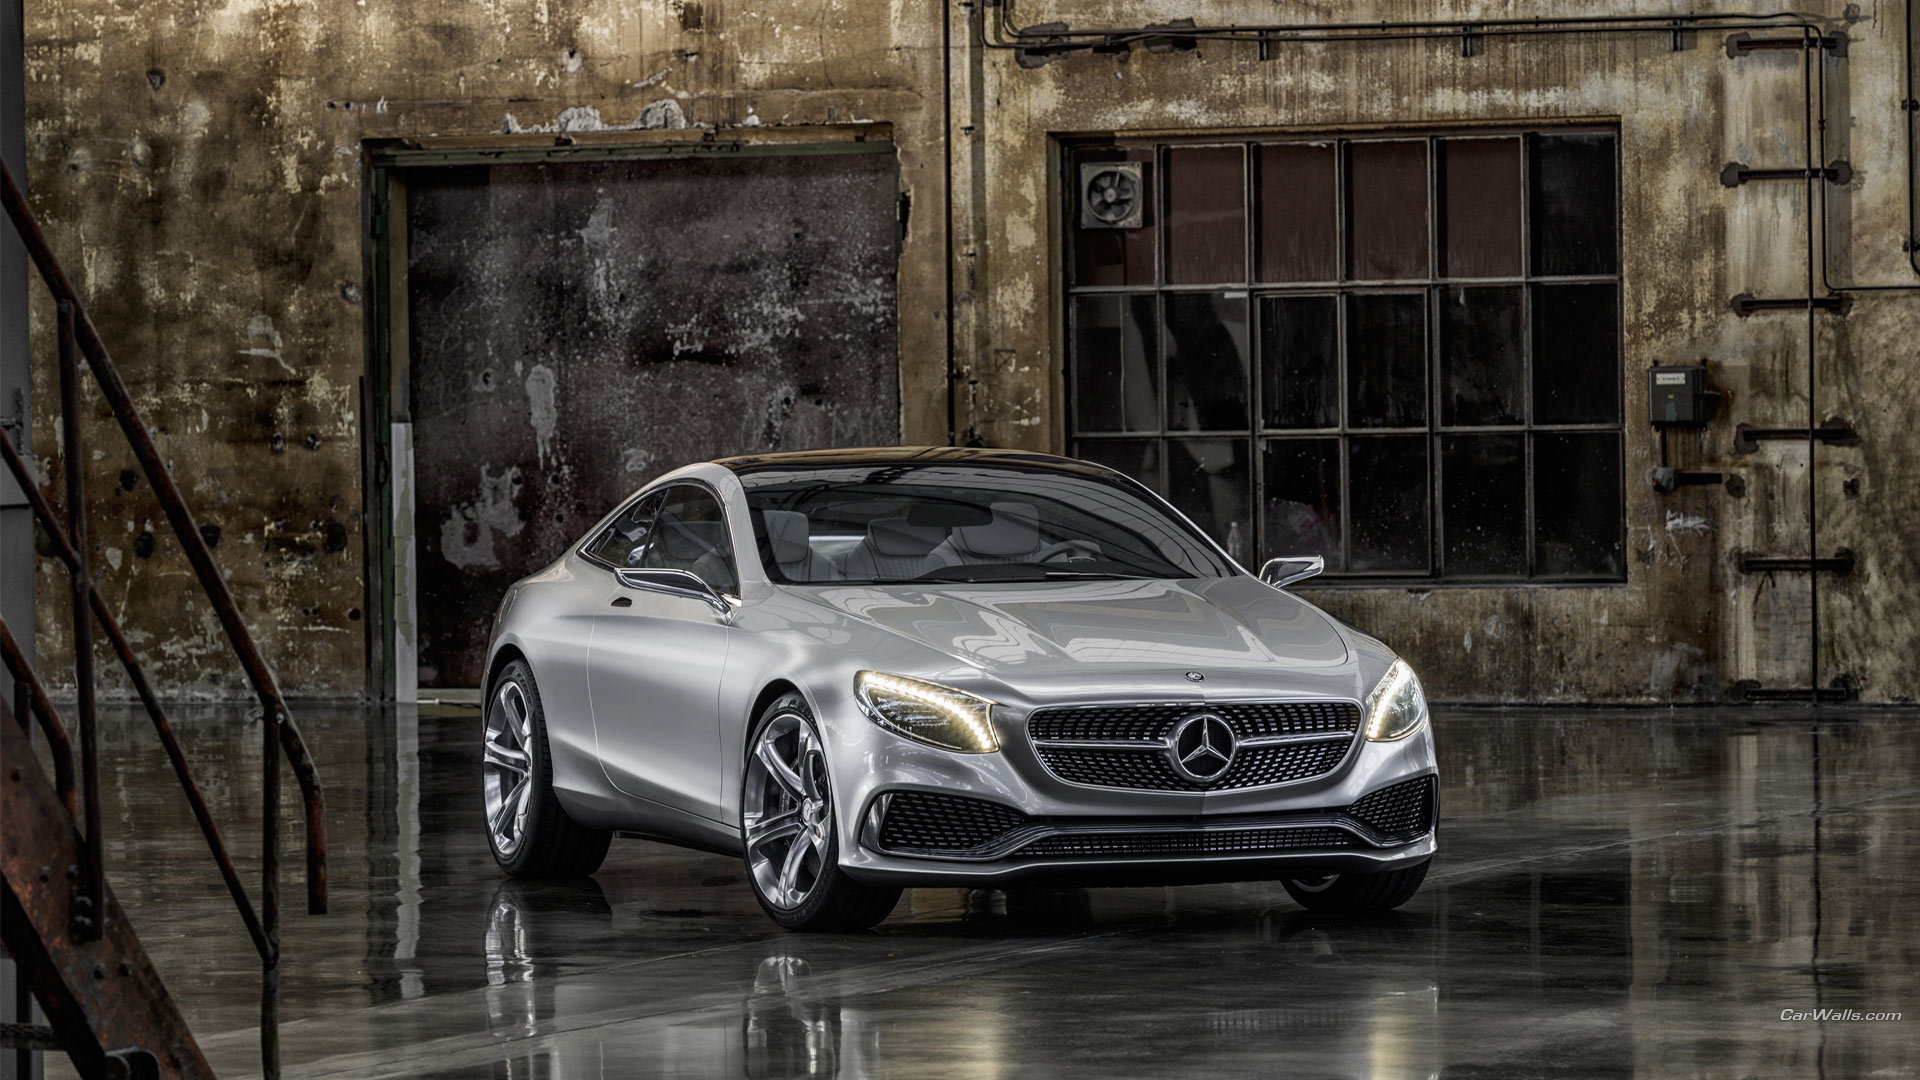 High resolution Mercedes-Benz S-Class Coupe hd 1920x1080 background ID:21710 for PC